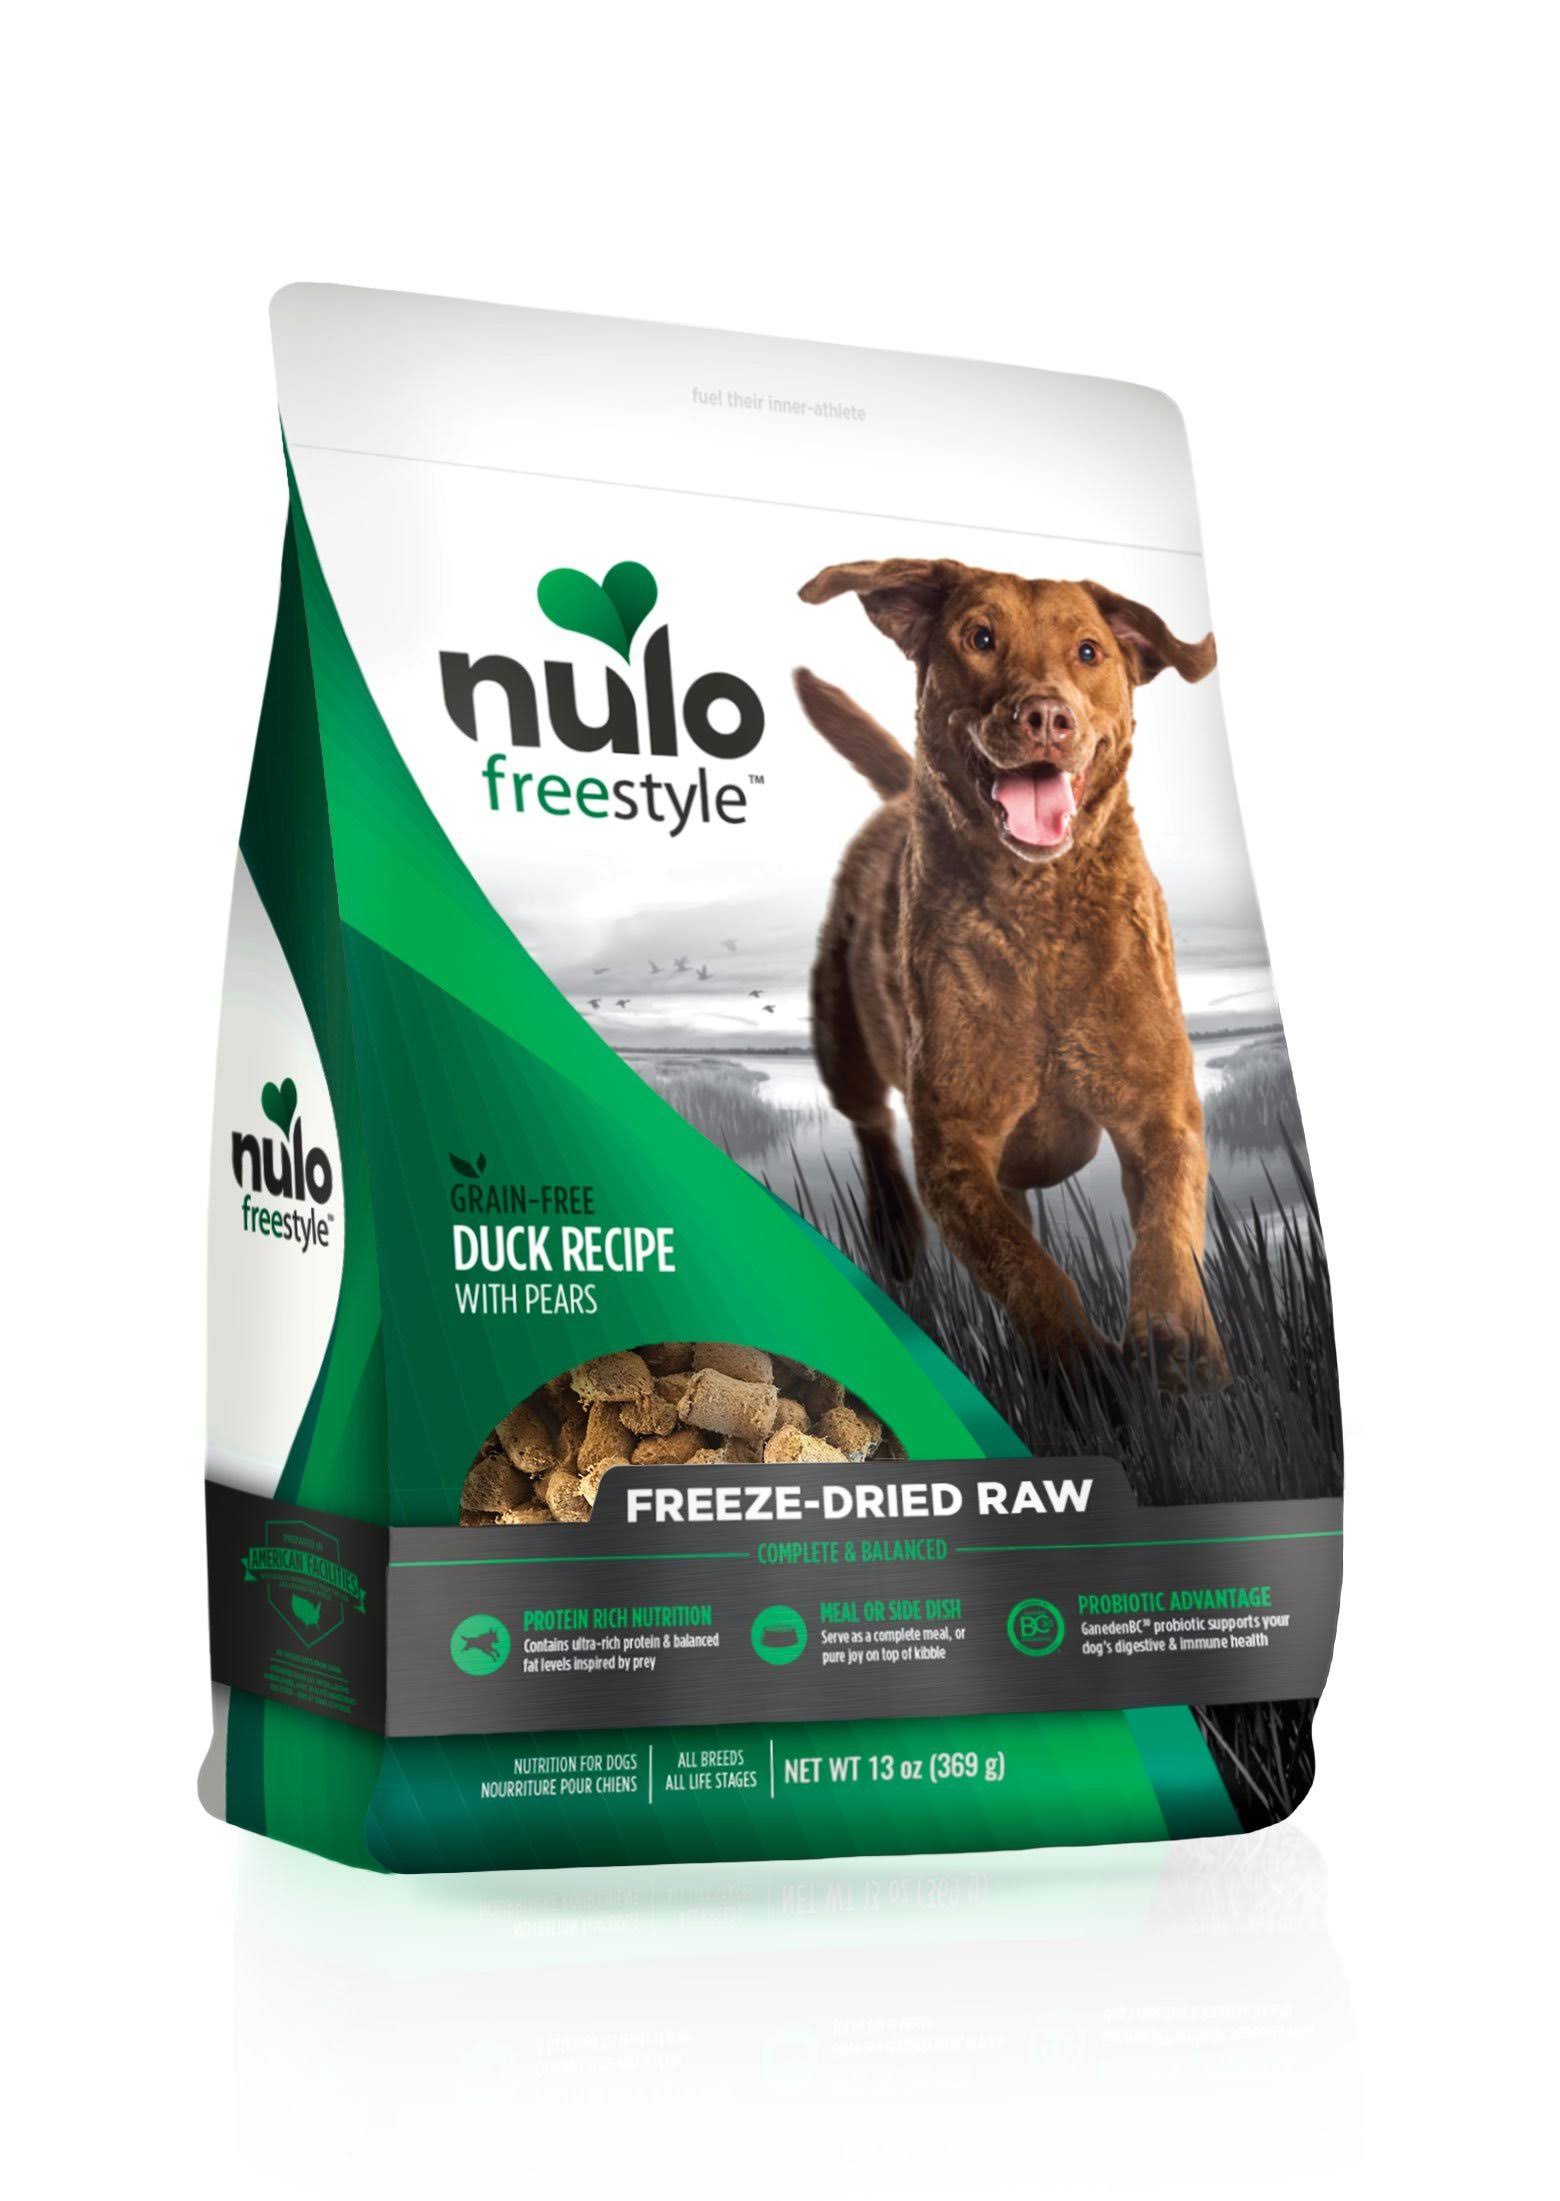 Nulo Freestyle Freeze-Dried Raw Duck with Pears Dog Food - 13 oz